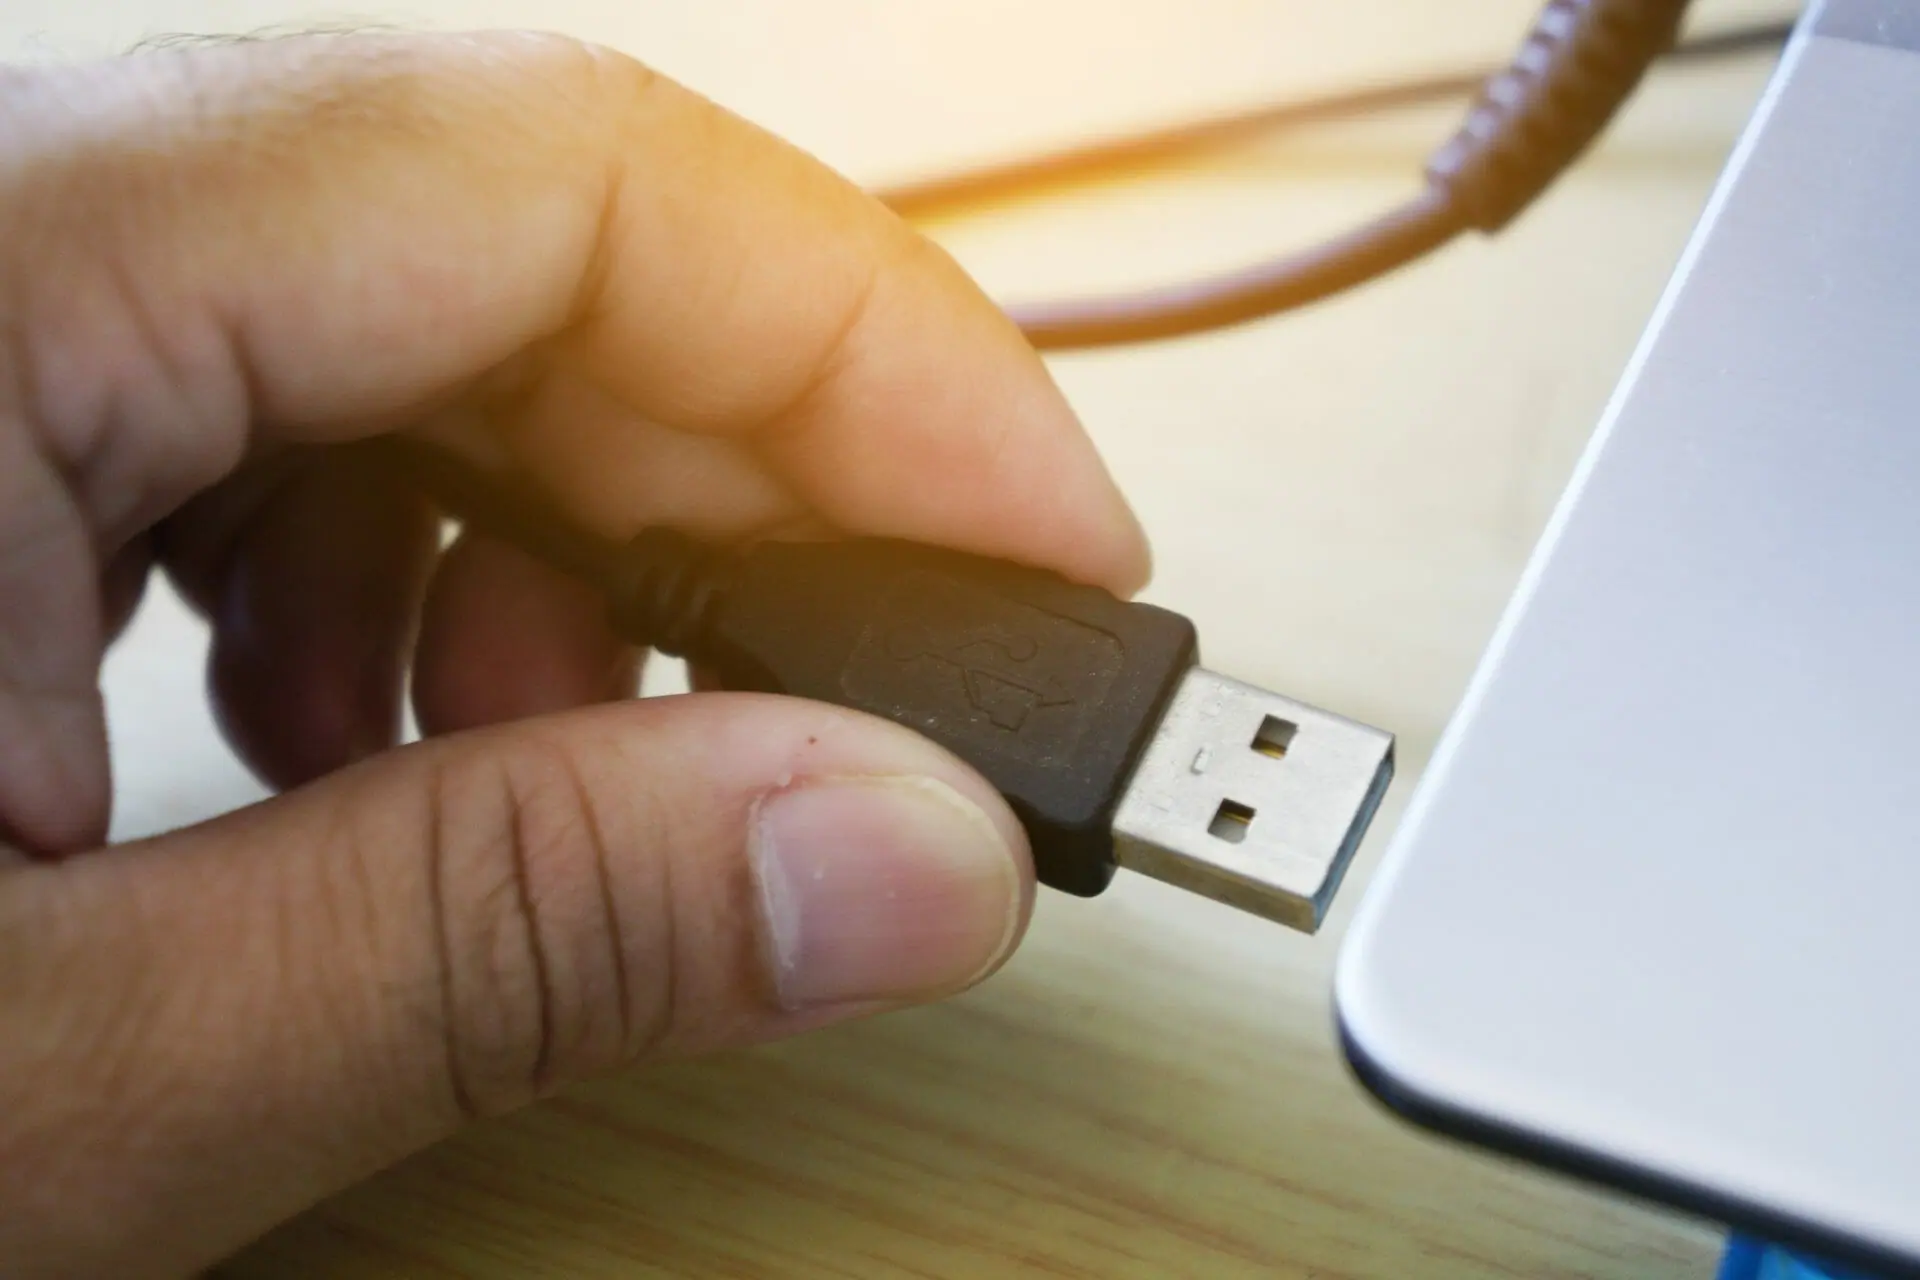 easily install the USB driver on Windows 10